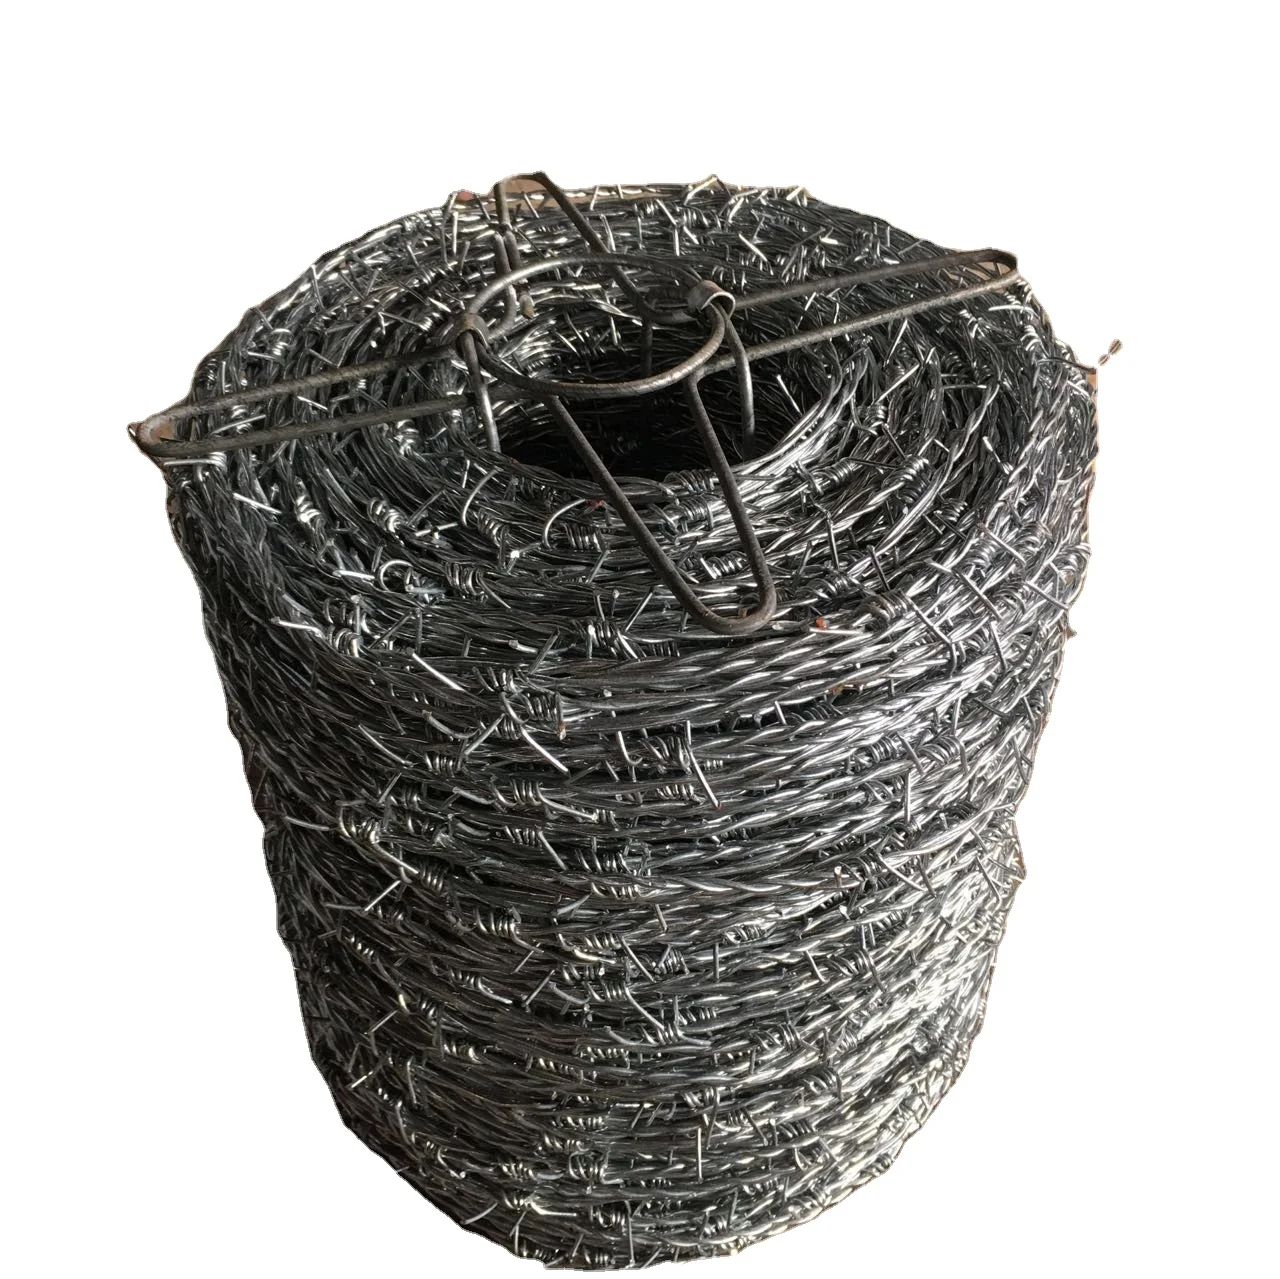 Security Fencing Hot Dipped Galvanized Barbed wire/25kg barbed wire/ 200m Barbed Wire (1600545492935)